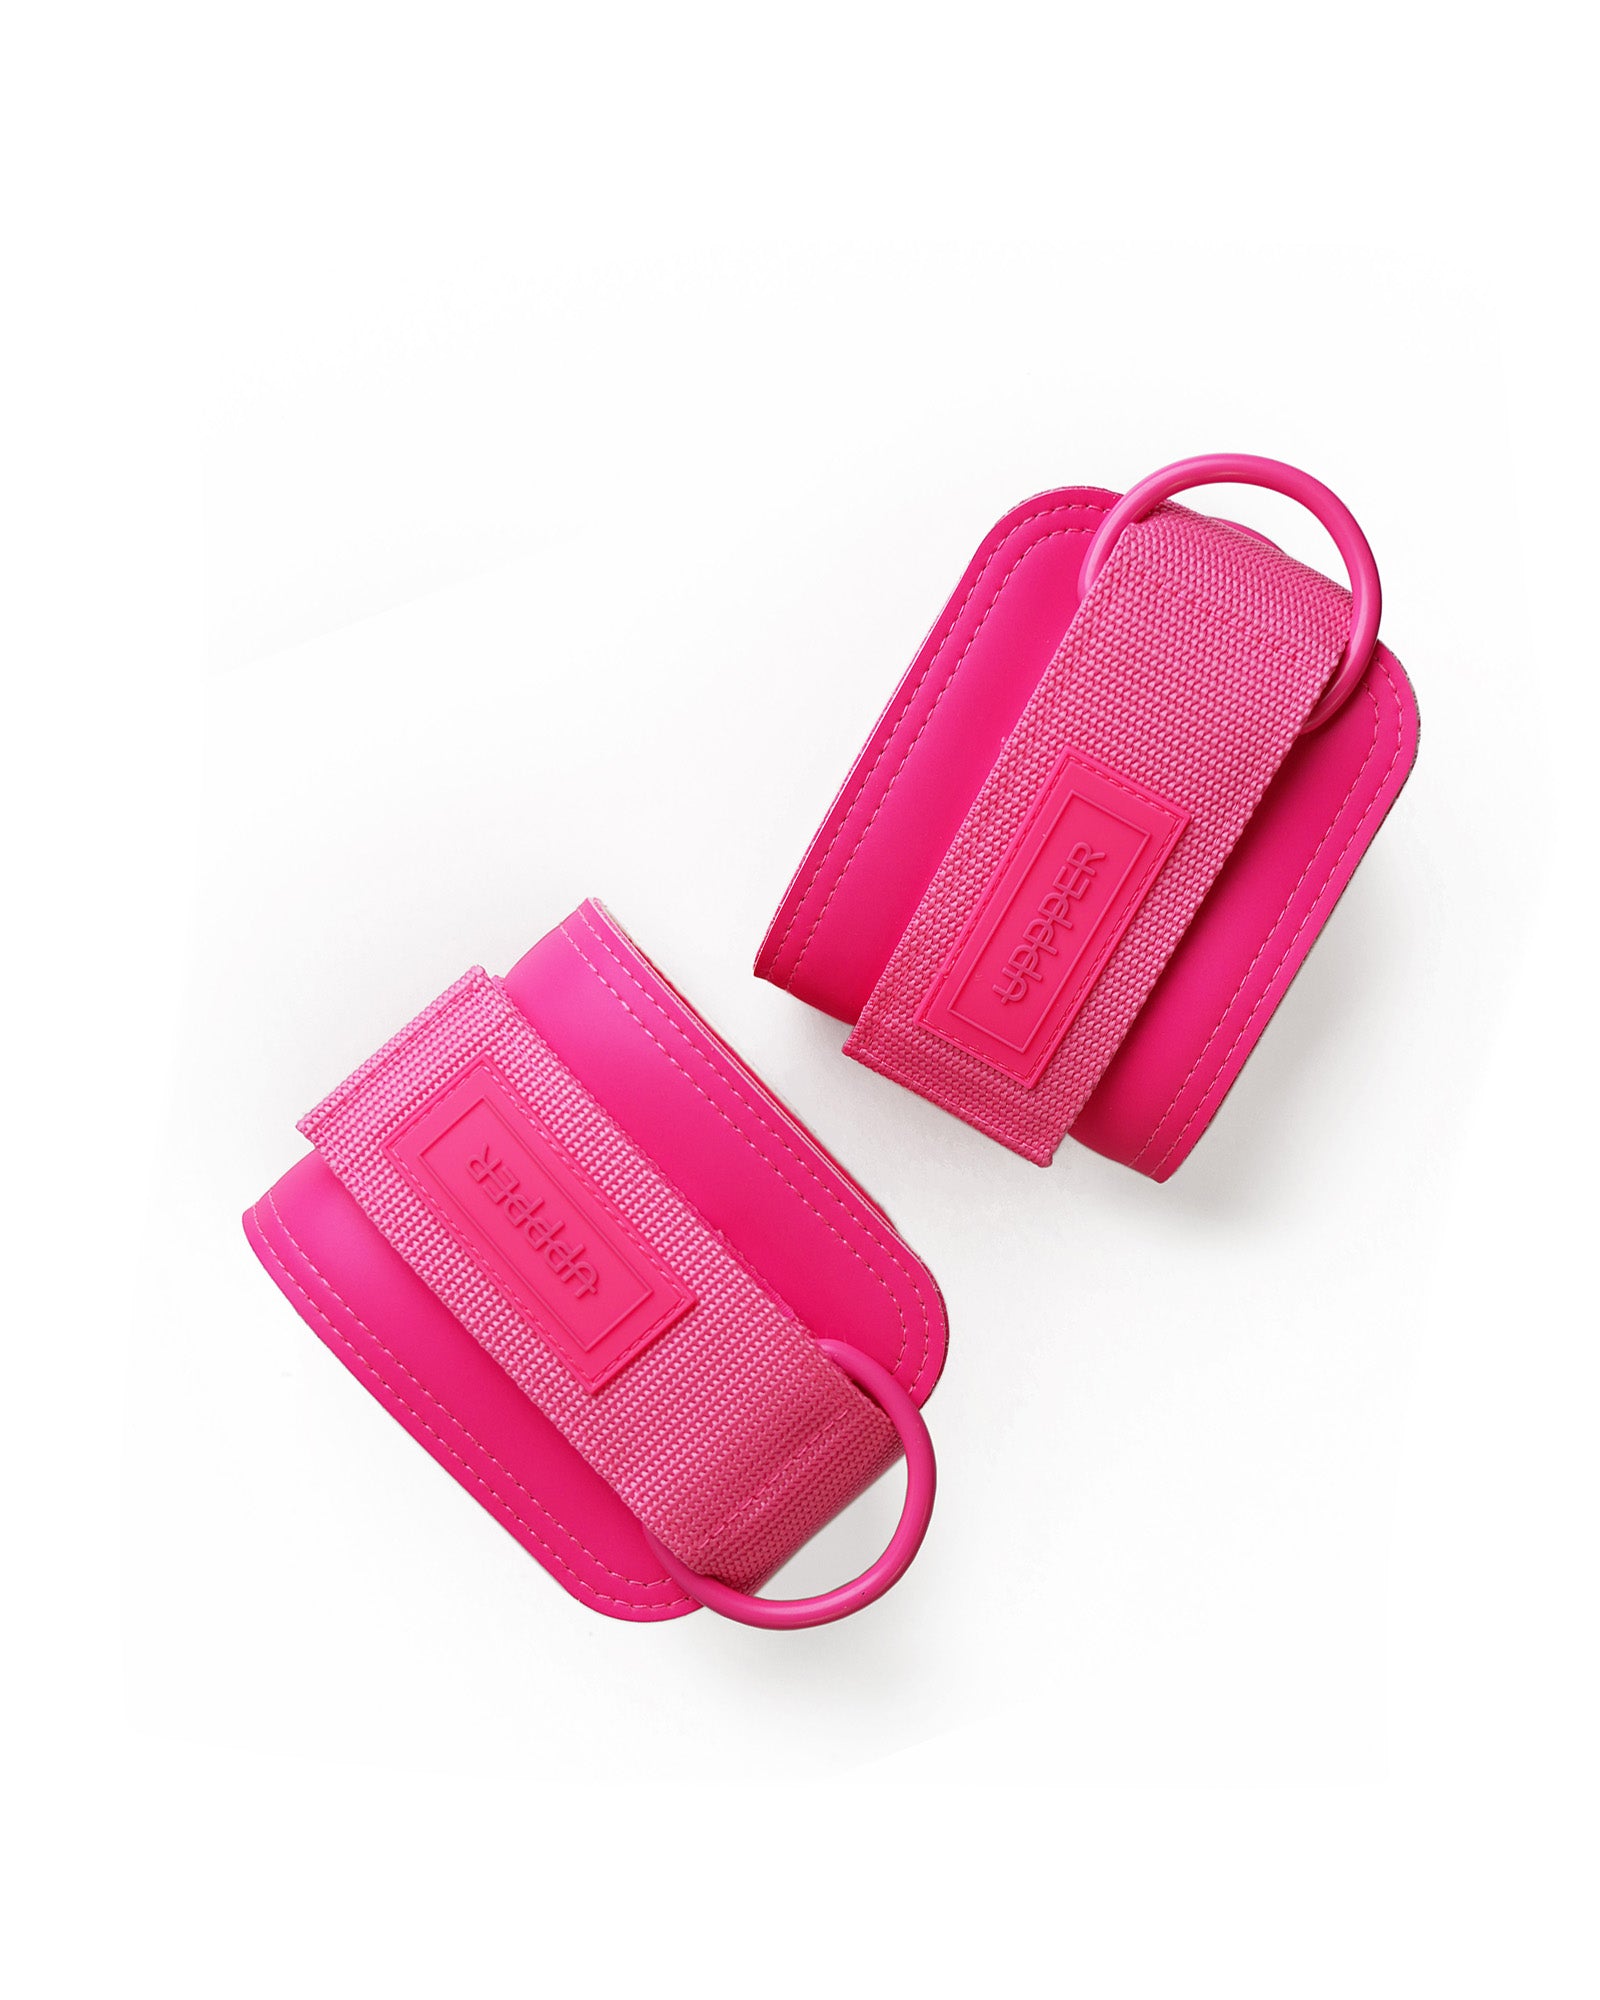 uppper ankle straps neon pink